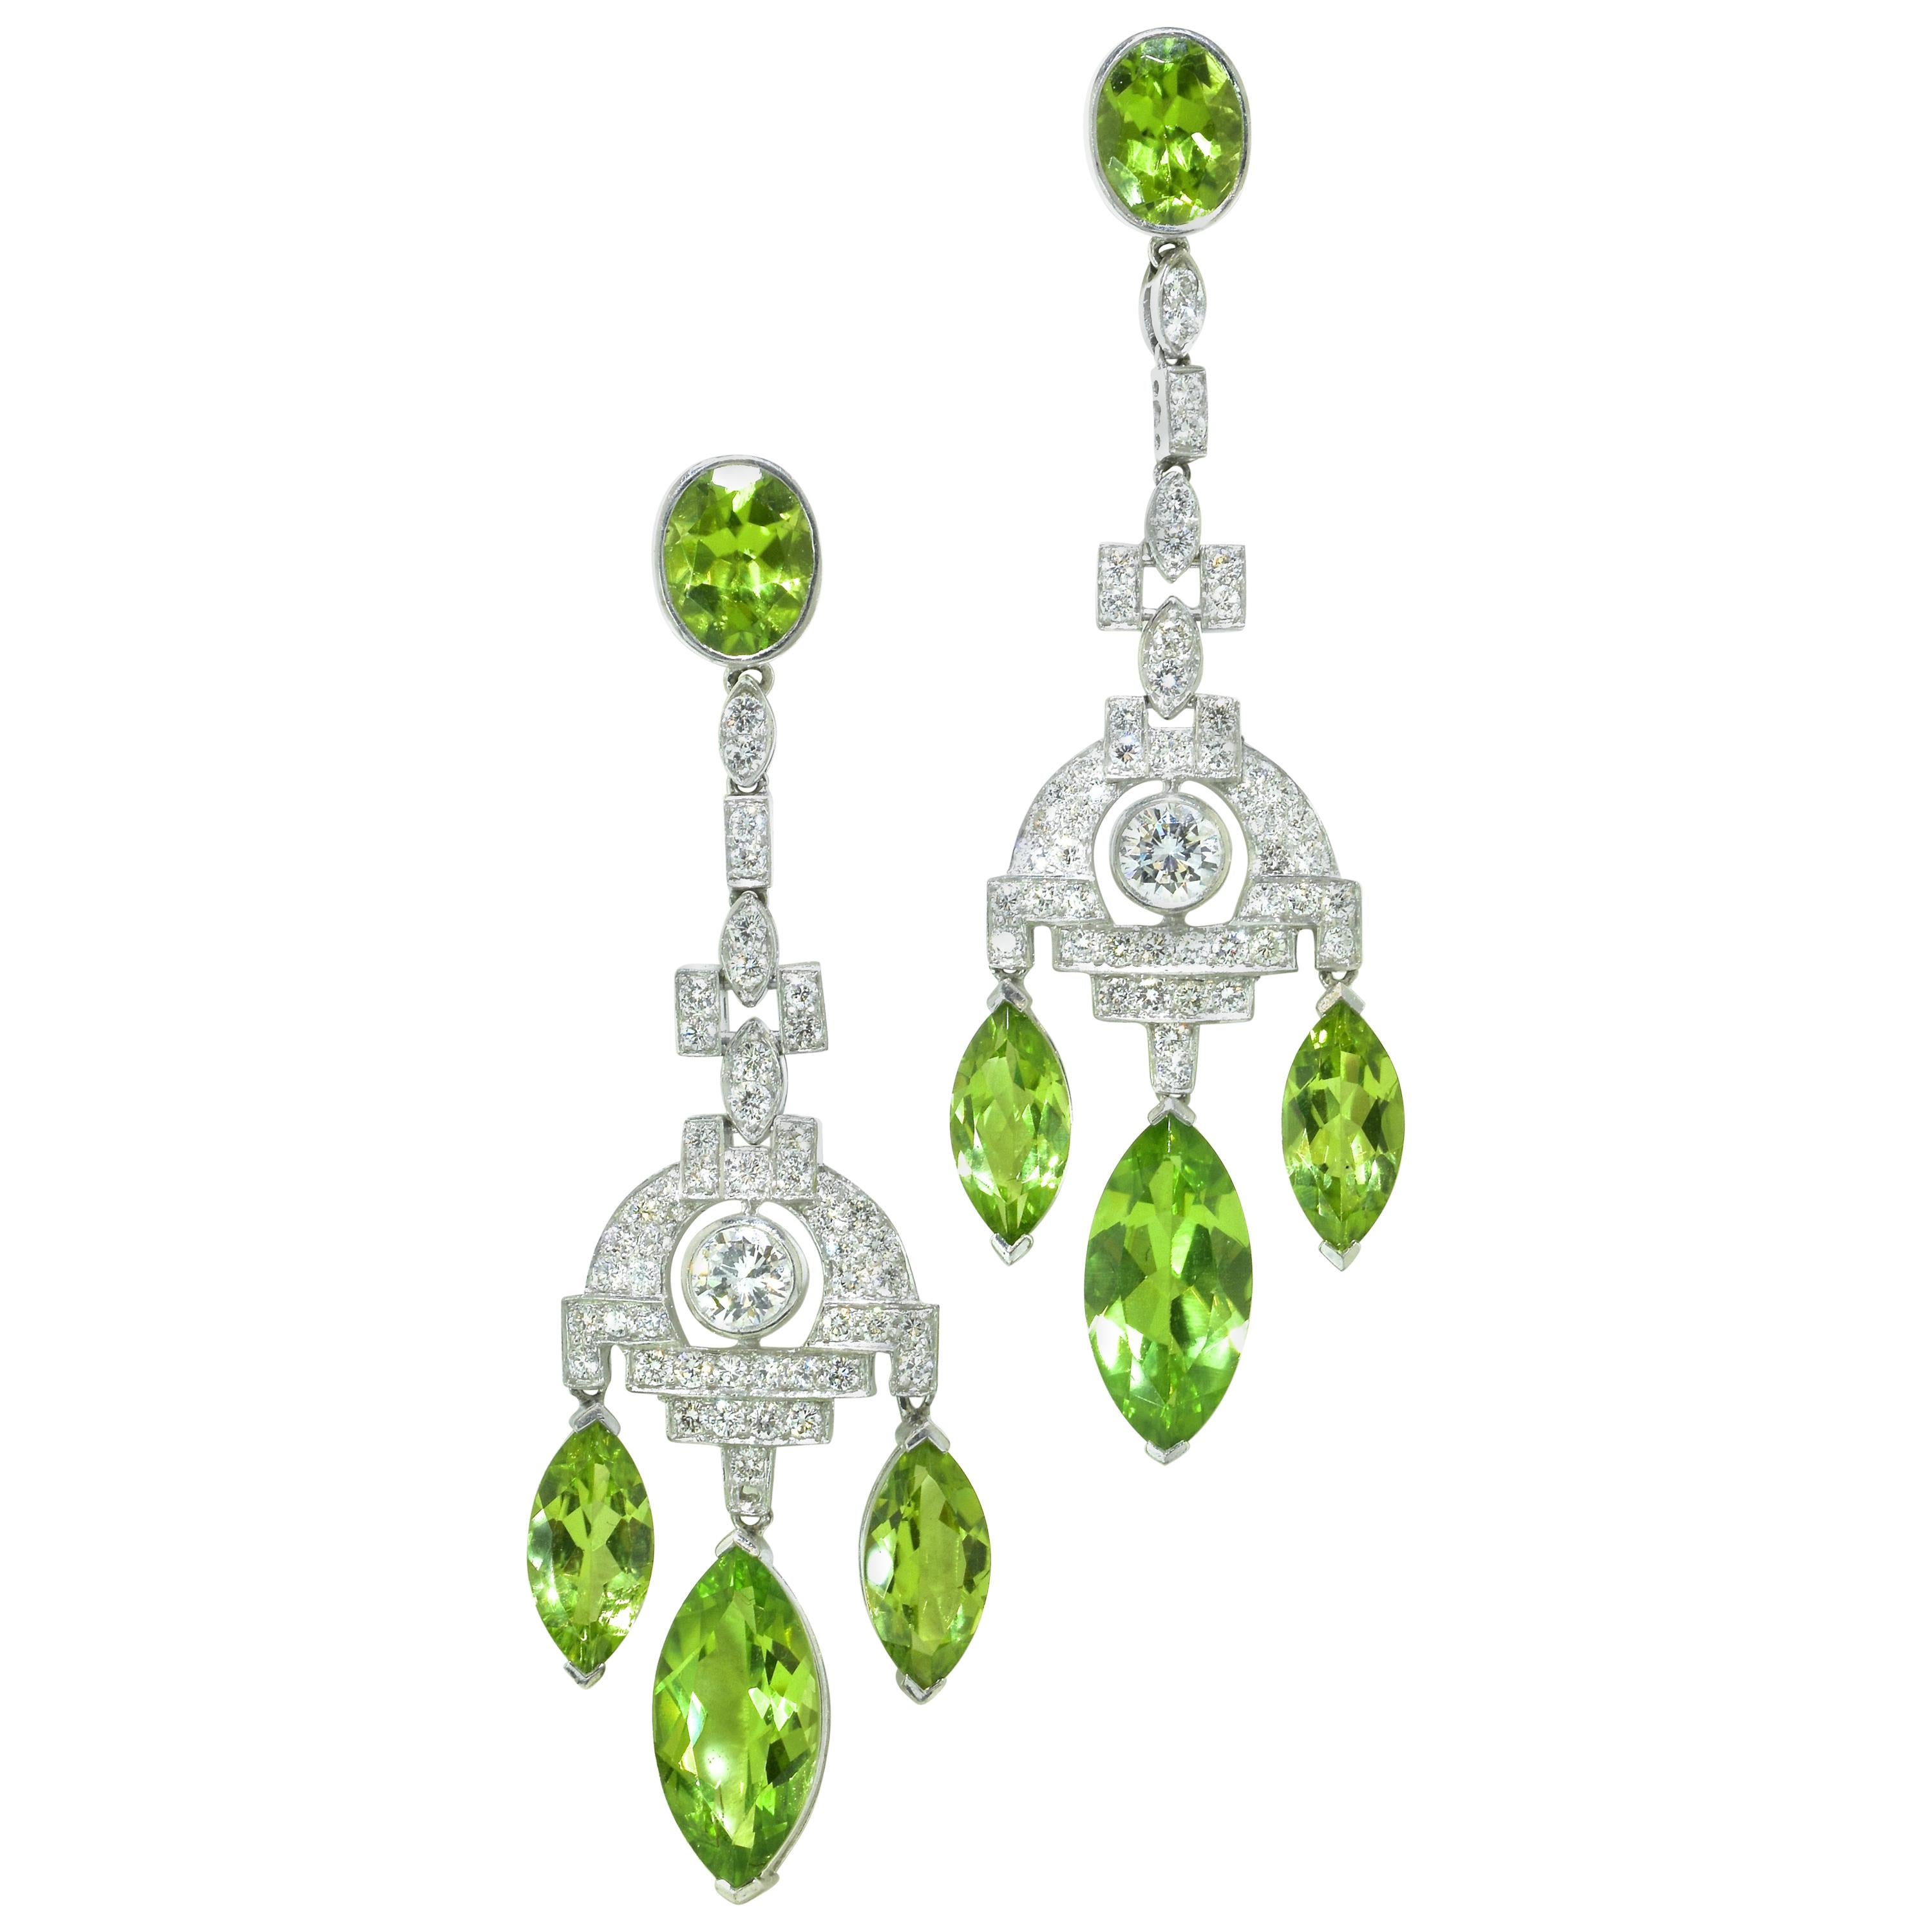  Earrings in platinum possessing 20 cts., of natural fine bright green peridot with 3 cts of near colorless, very slightly included, well matched diamonds, (H), near colorless and very slightly included (VS1).  These earrings are 2.5/6 inches long. 